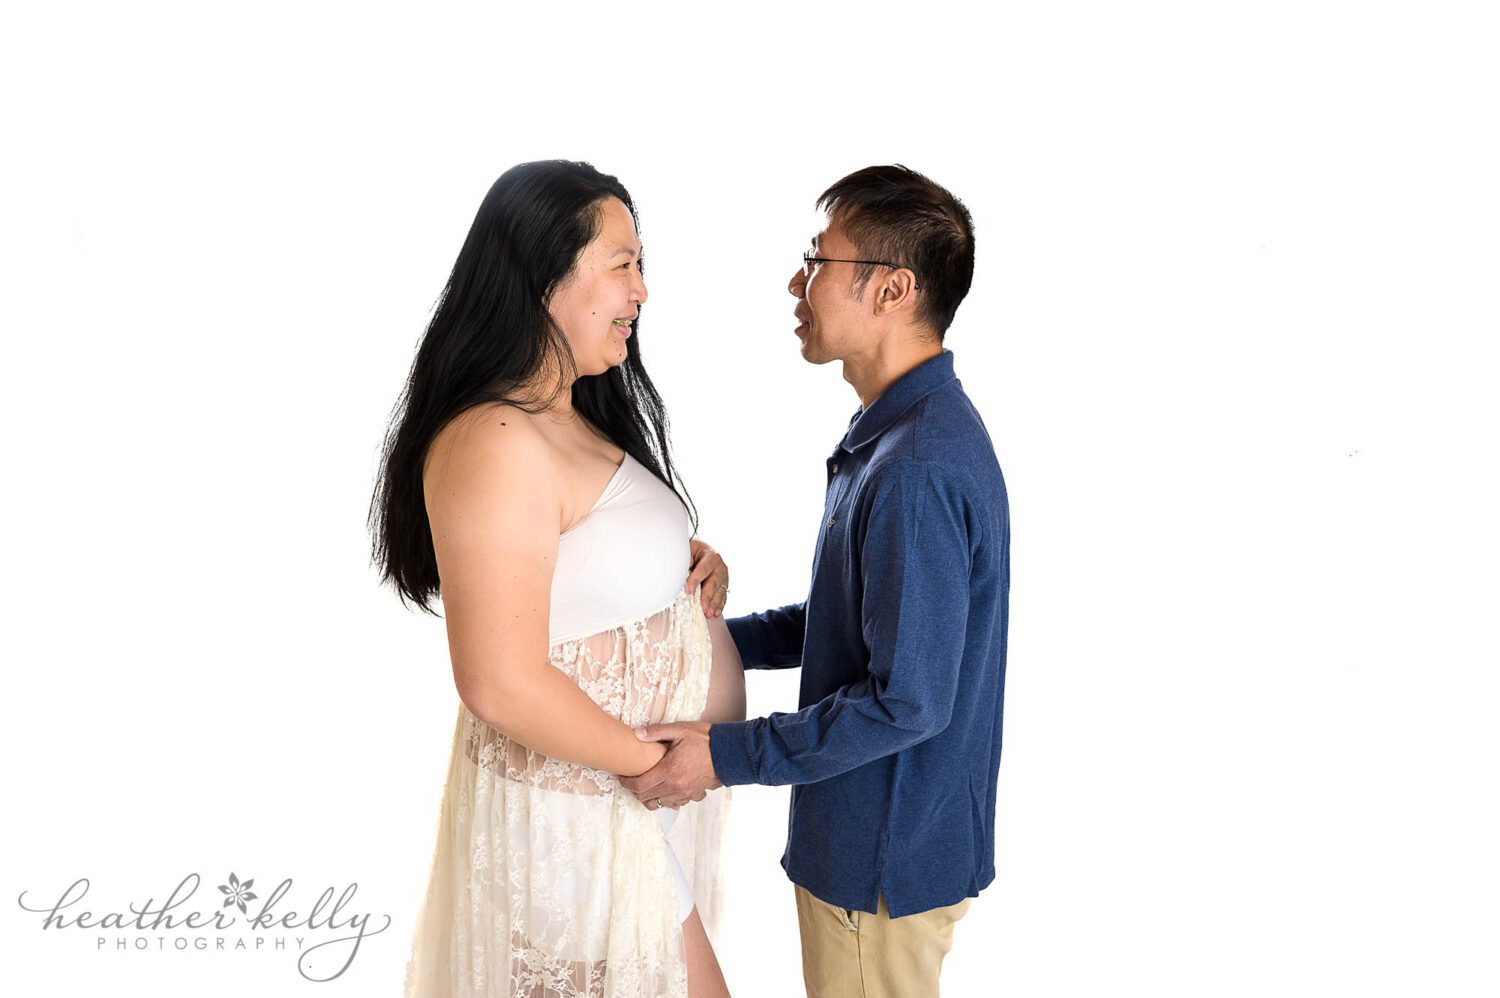 A high key white background. A maternity photography session. Mom to be a dad to be are looking into each other's eyes. Danbury maternity photographer